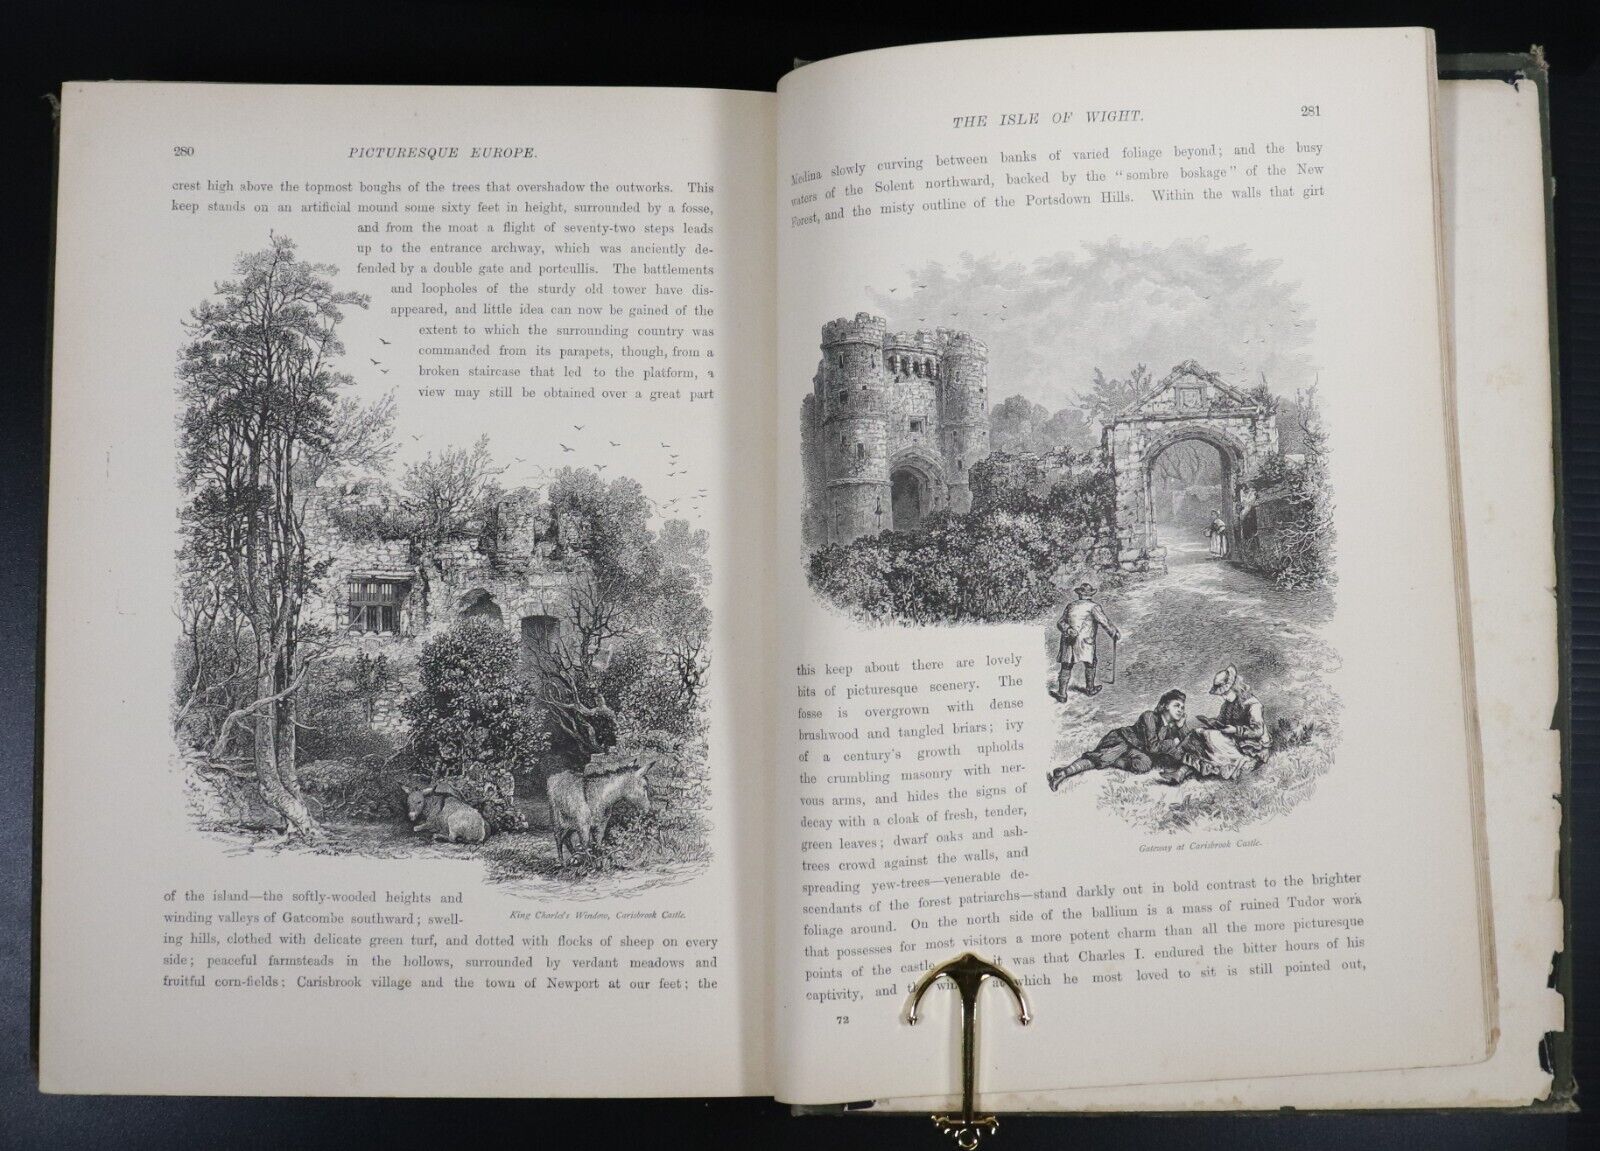 c1890 Picturesque Europe: The British Isles Antiquarian Illustrated History Book